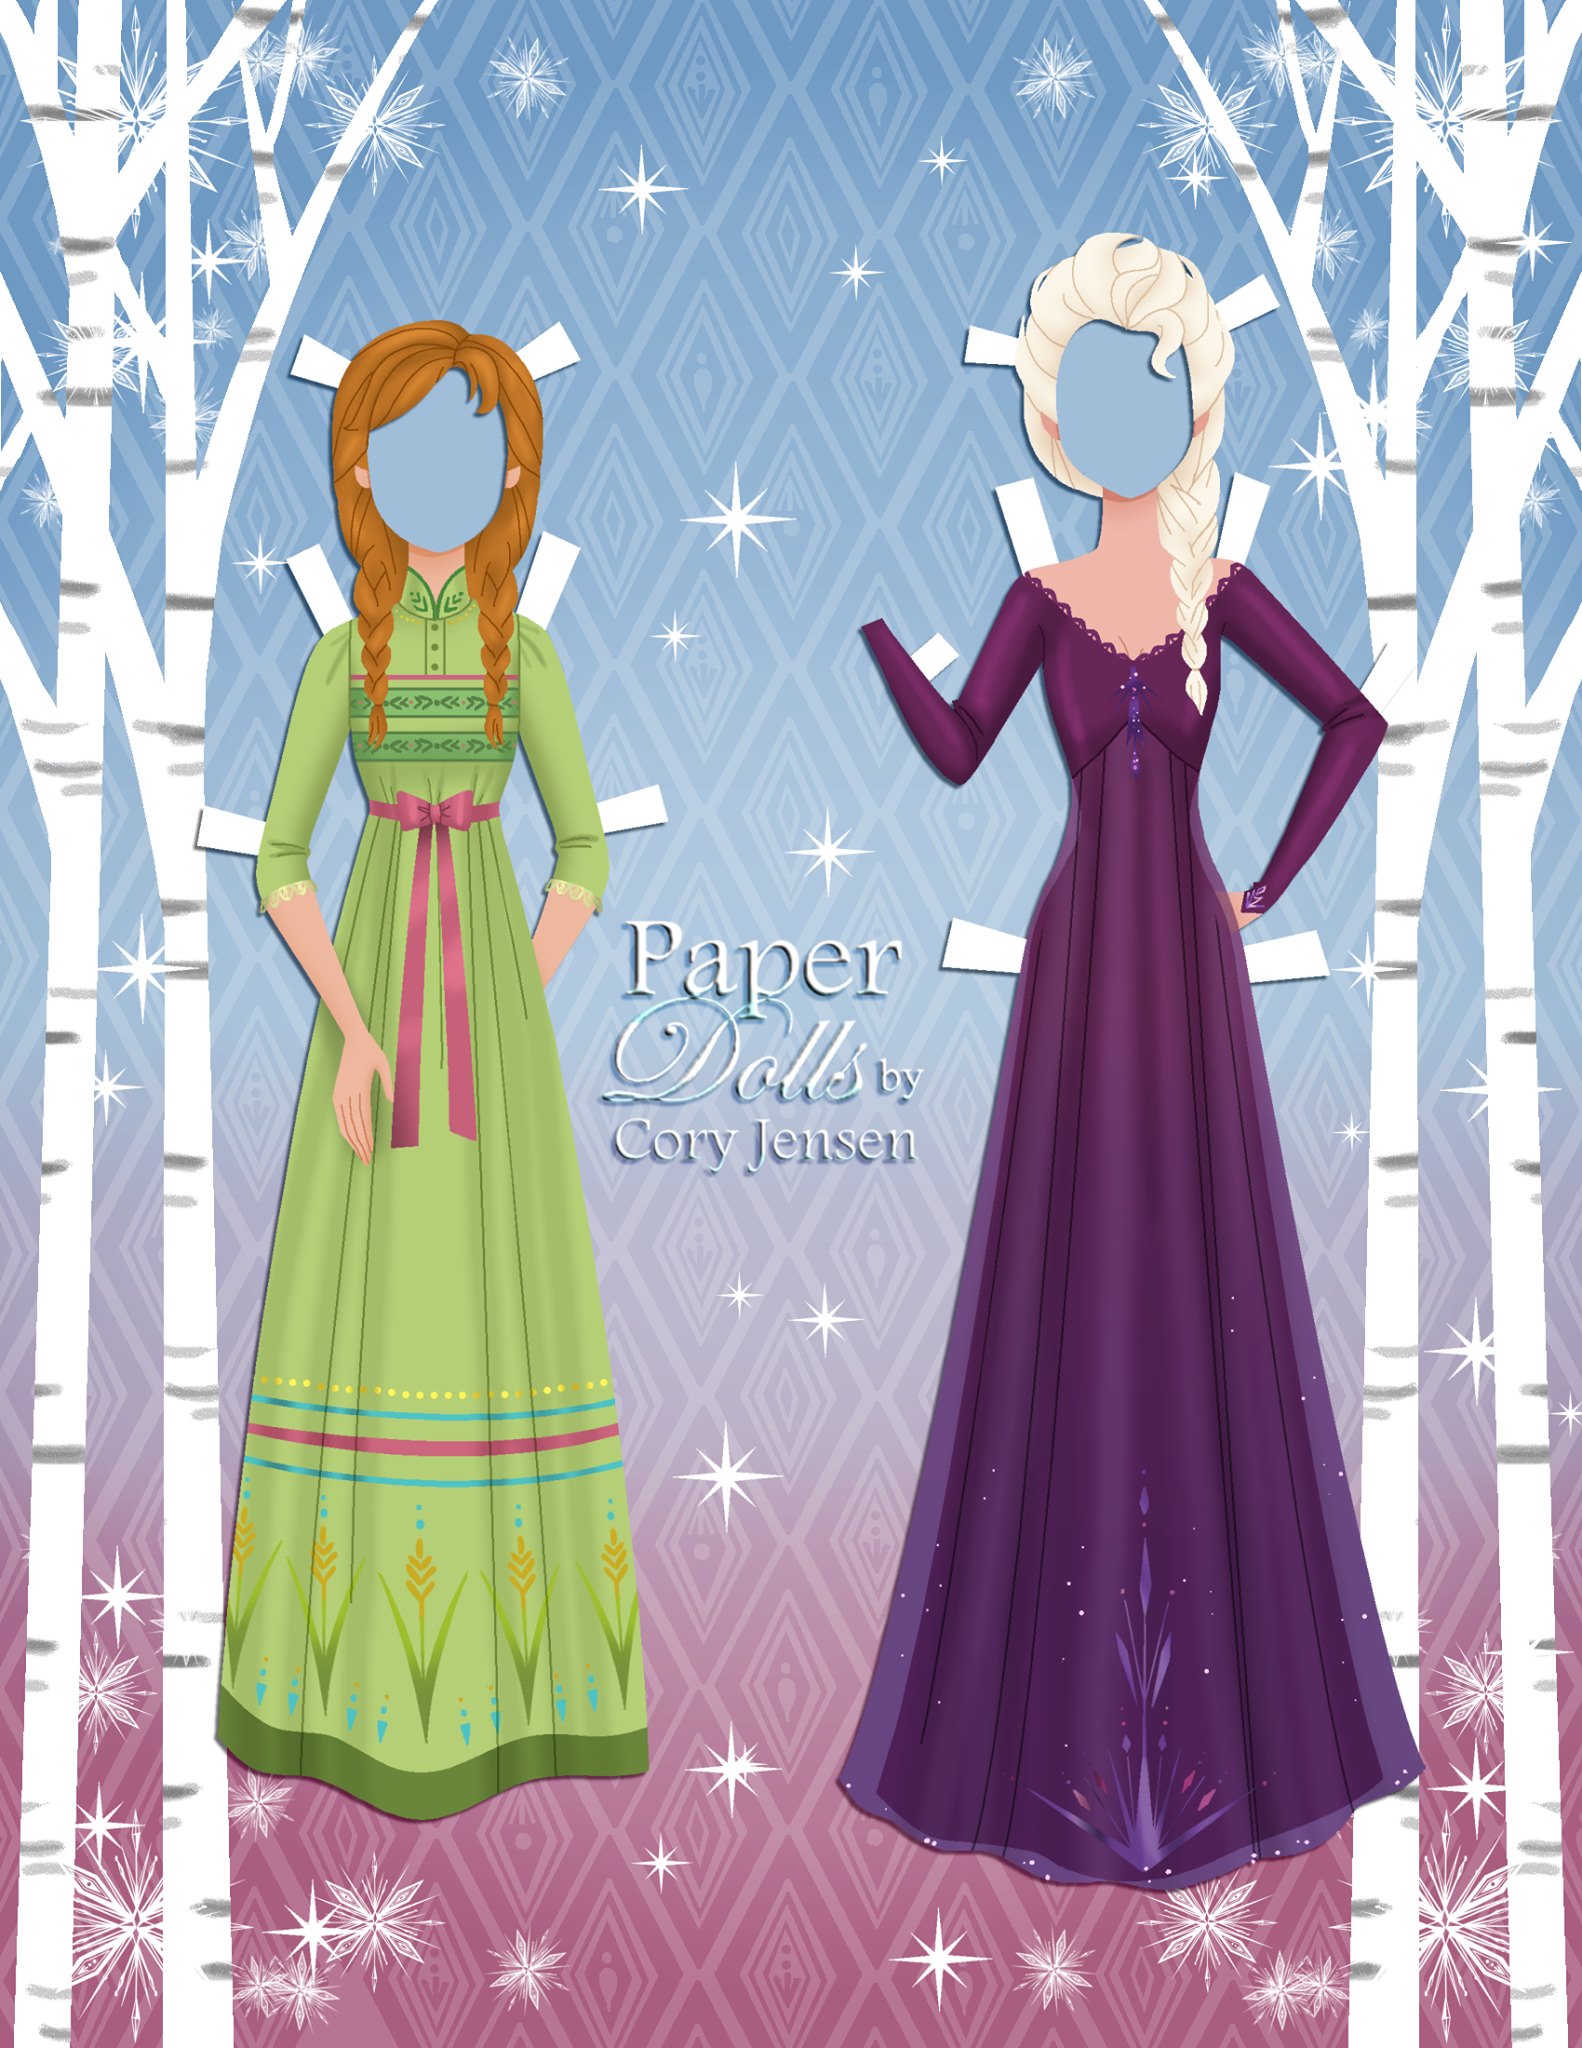 Frozen 2 Elsa and Anna paper dolls with clothing and dresses from the movie   YouLoveItcom